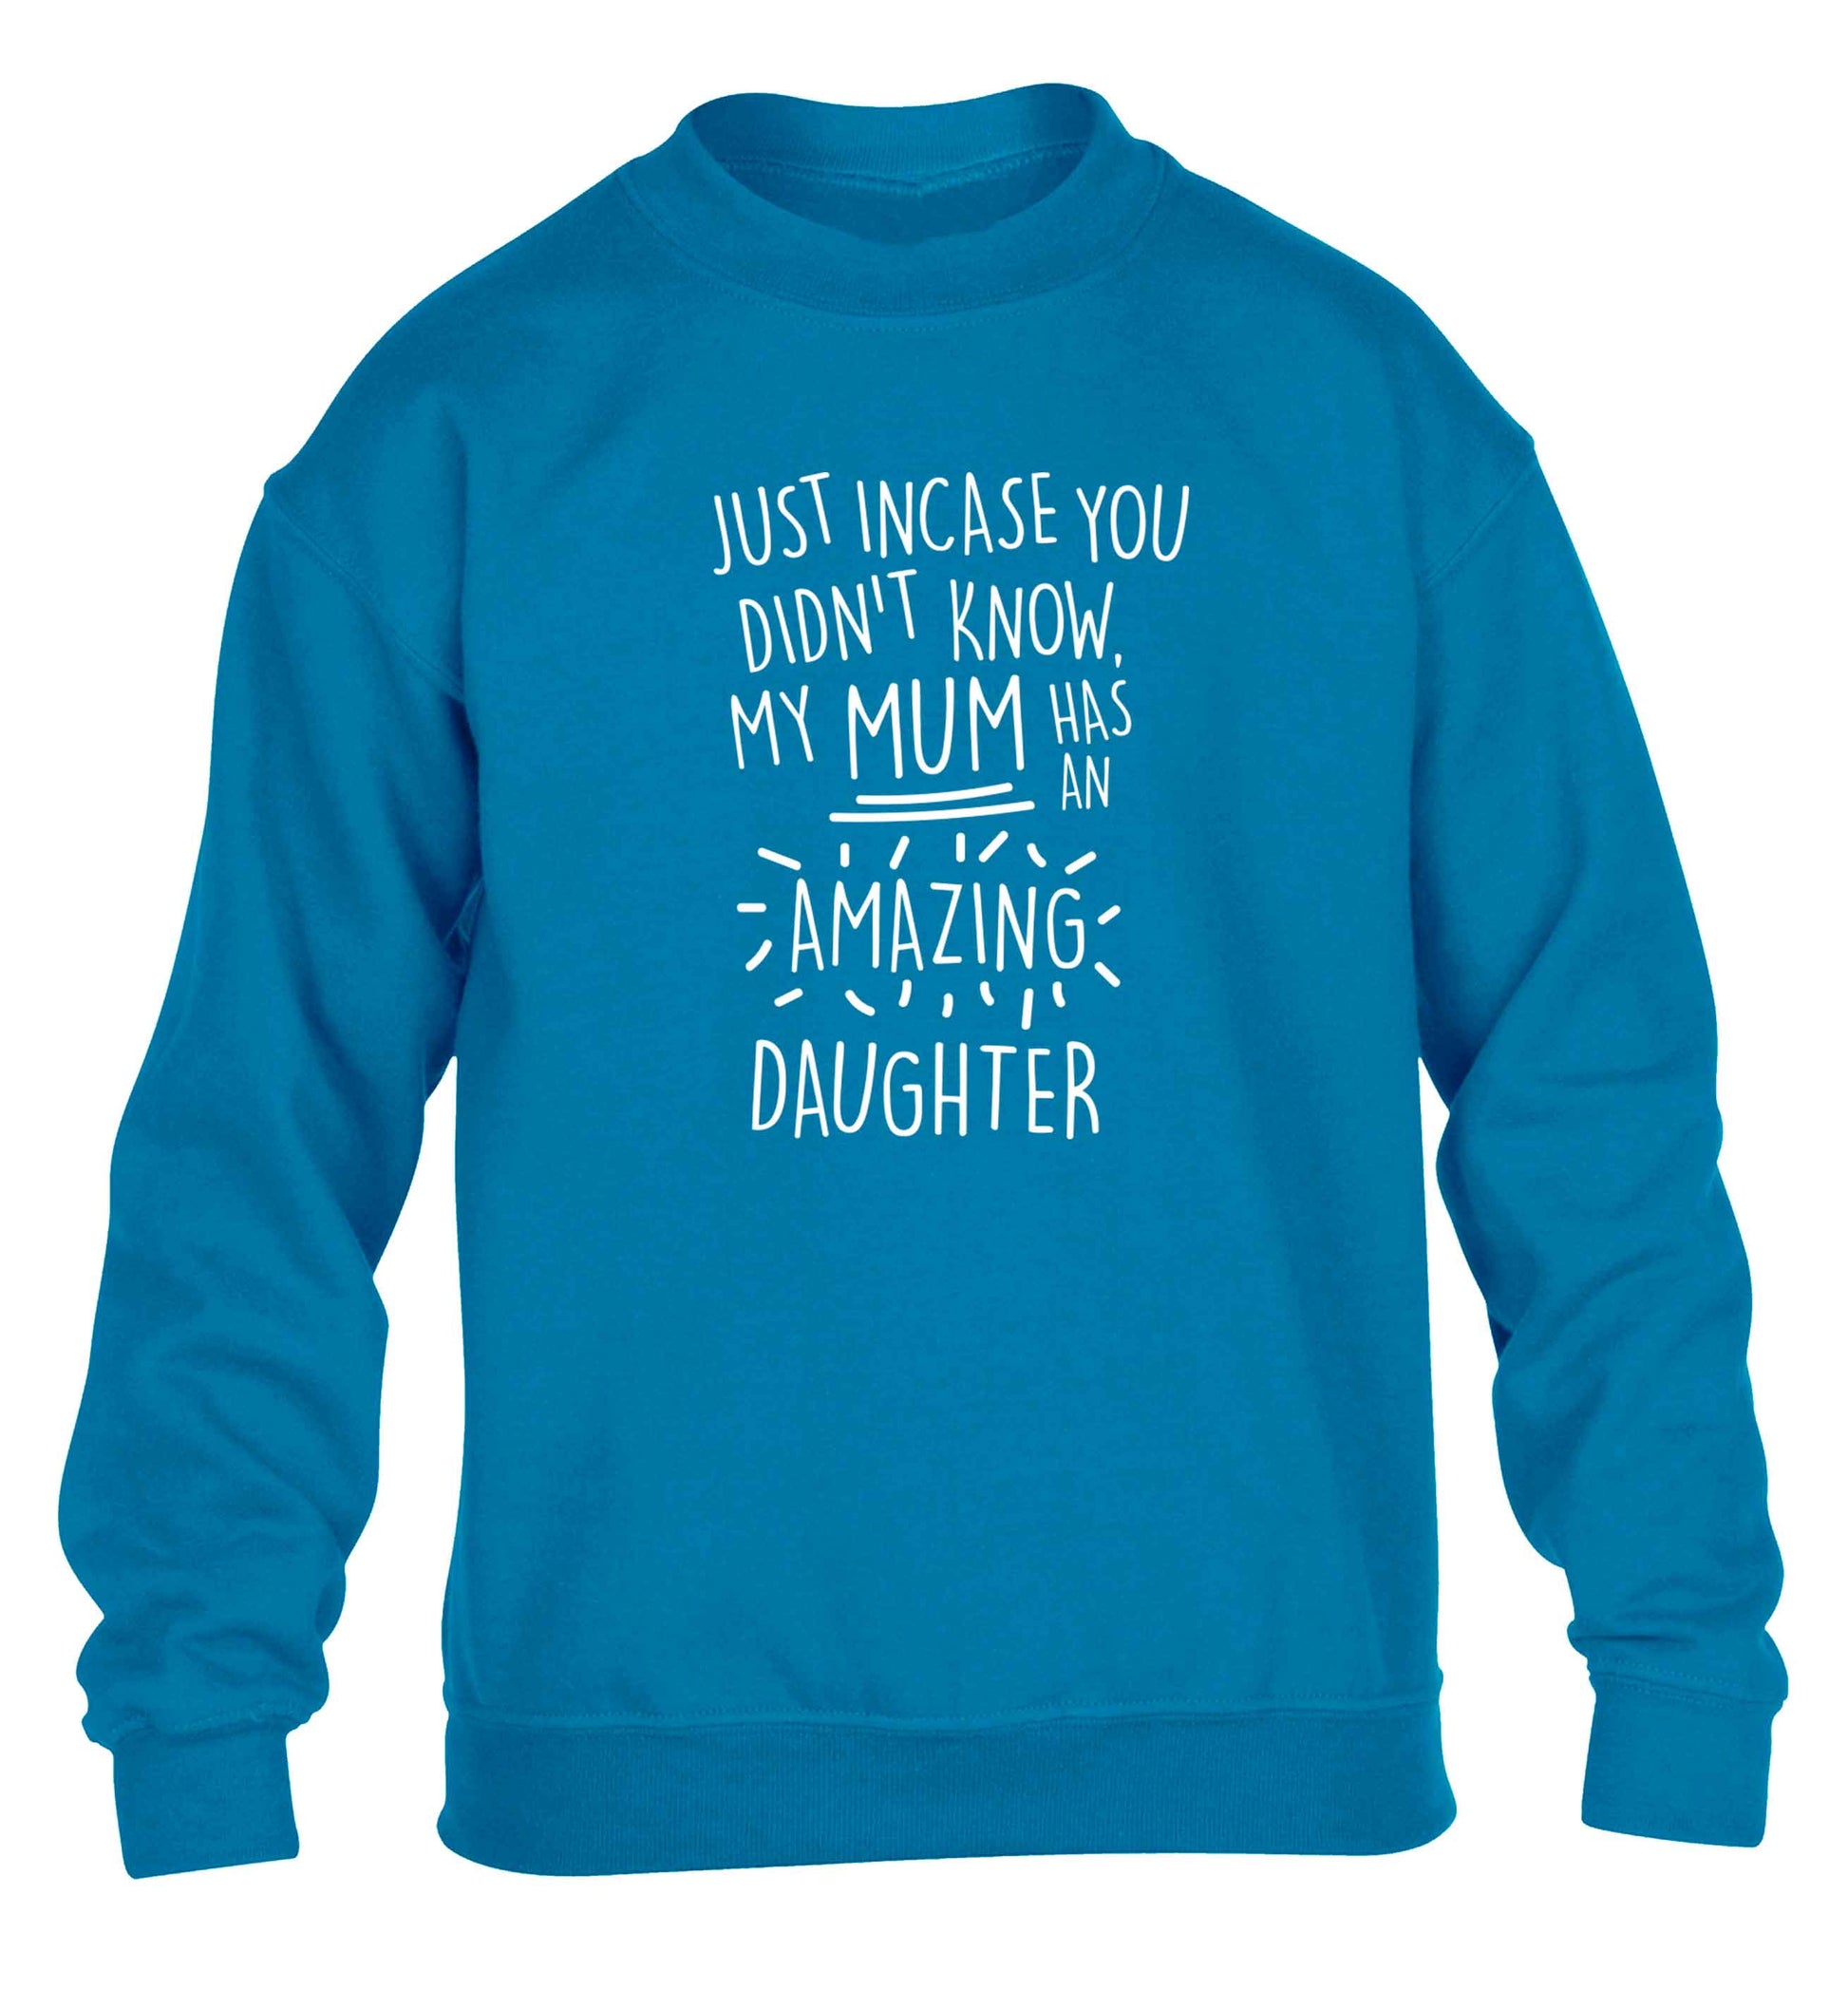 Just incase you didn't know my mum has an amazing daughter children's blue sweater 12-13 Years